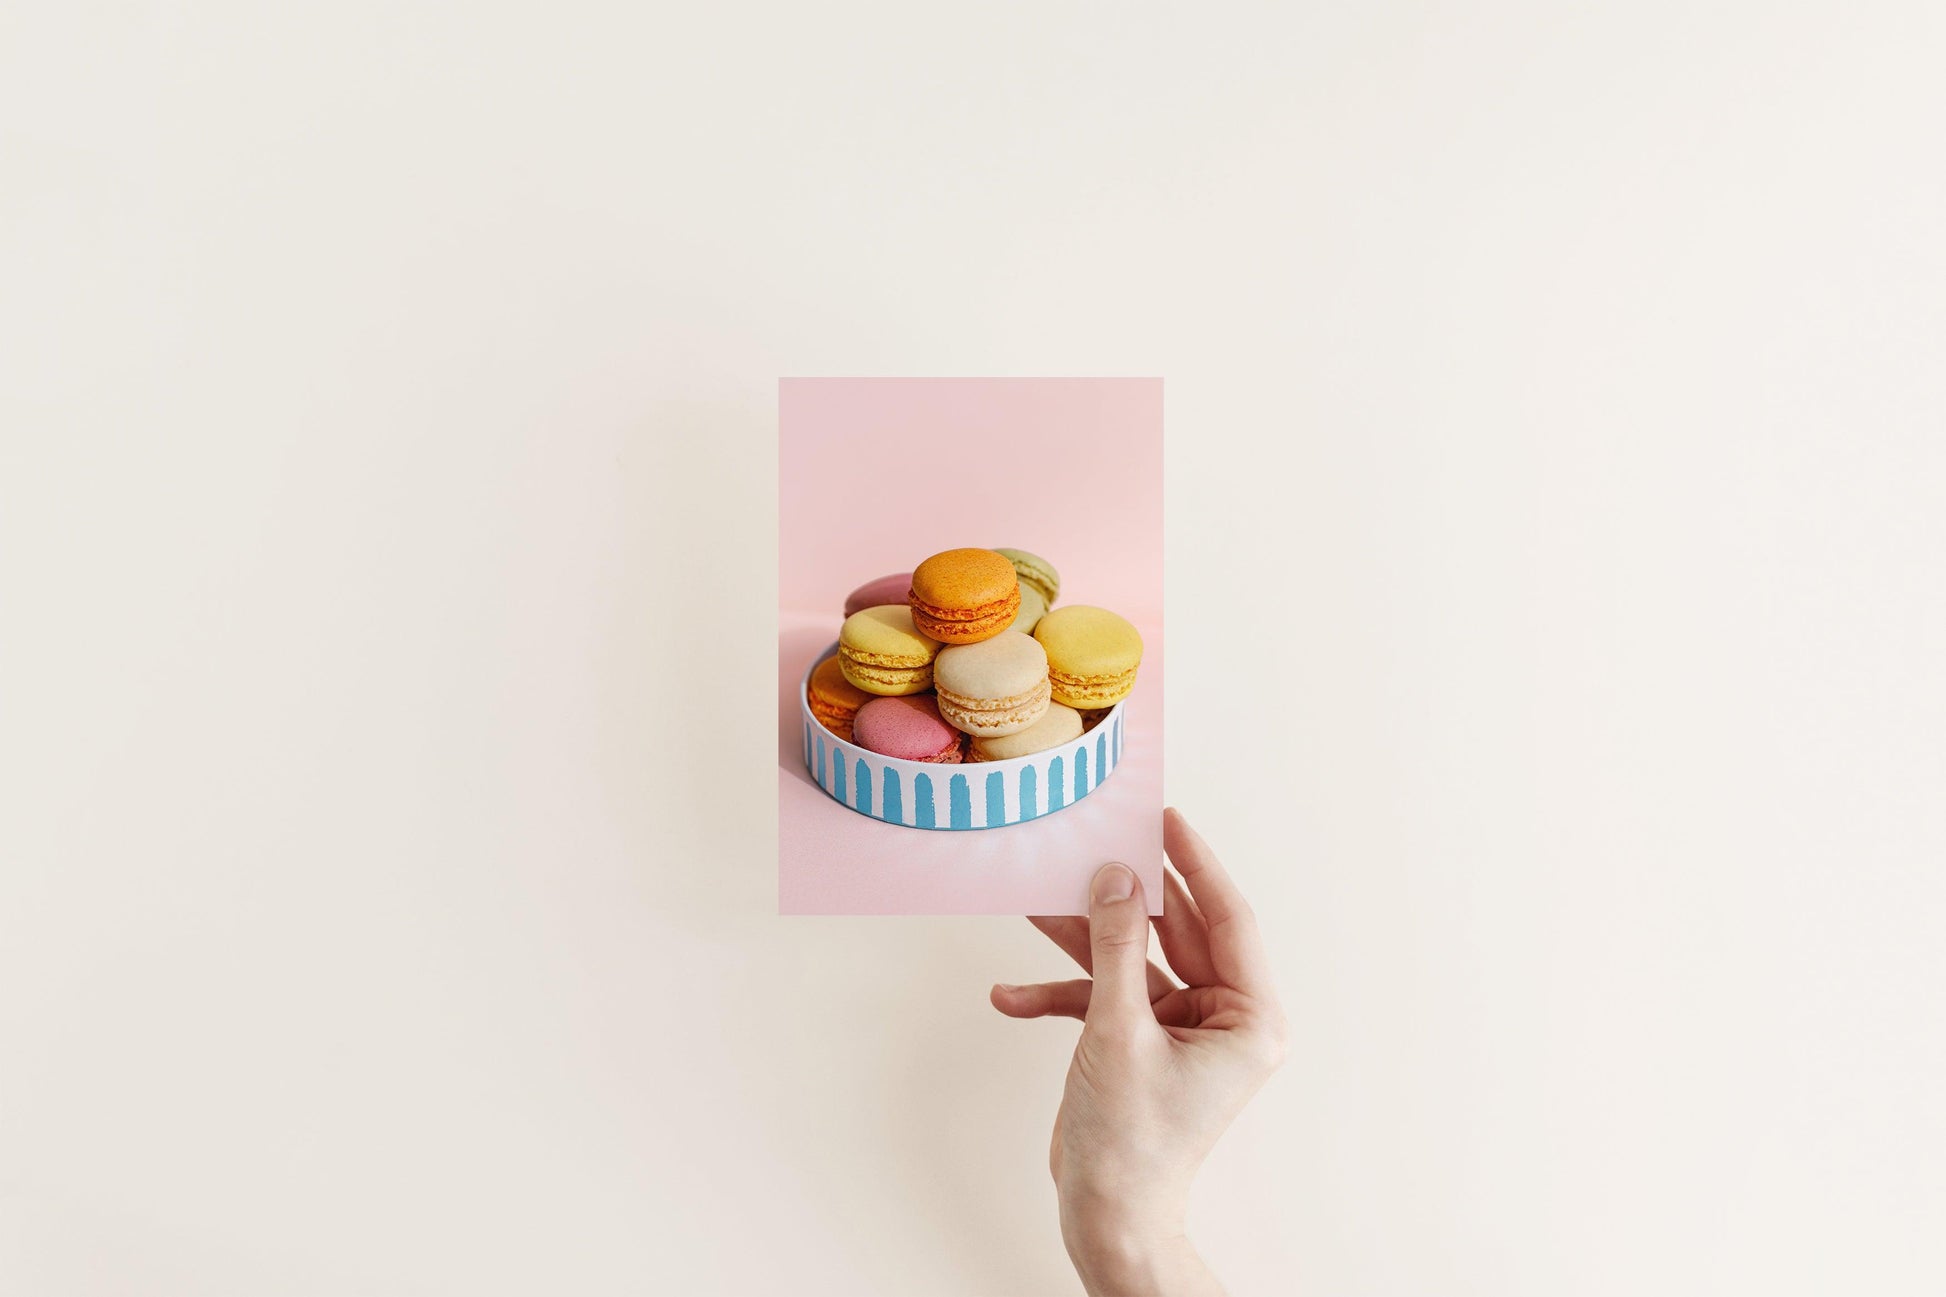 Box of French Macarons Print - Departures Print Shop